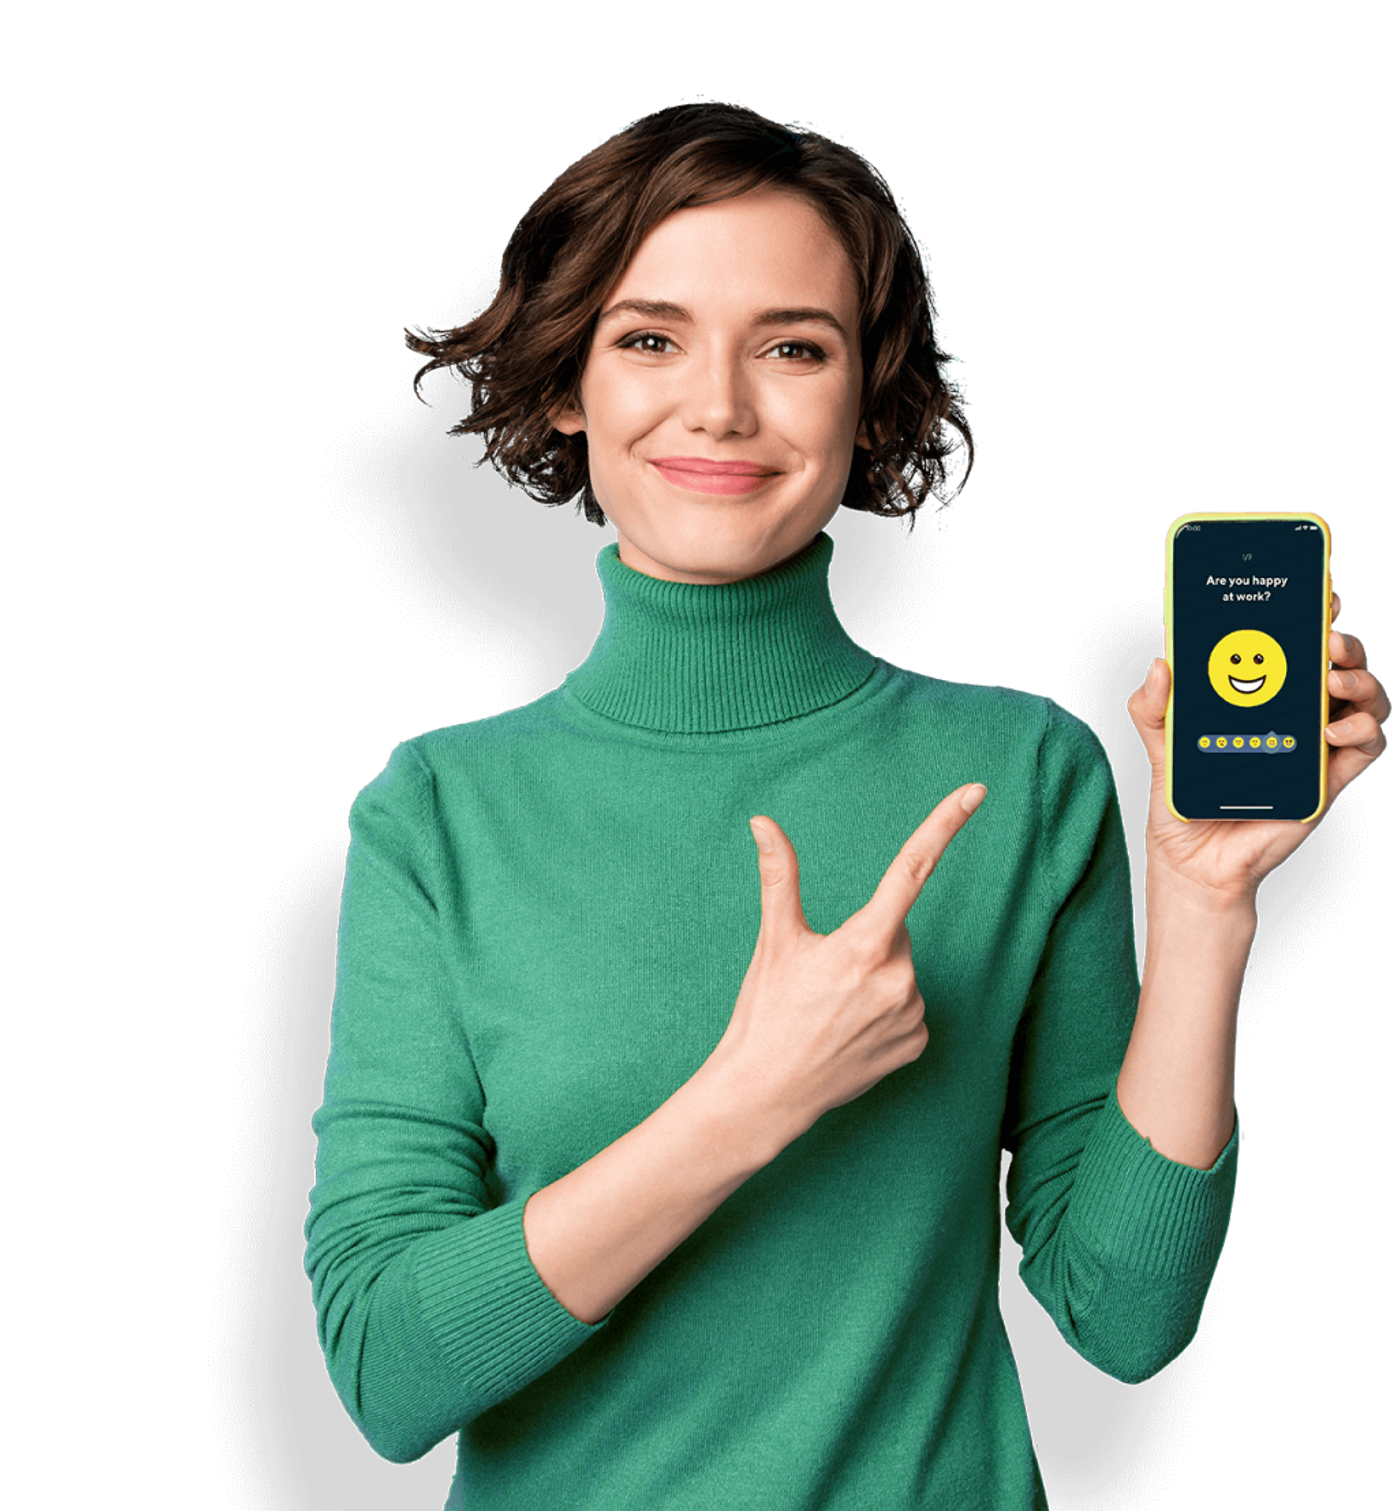 Woman in green sweater holding a mobile phone